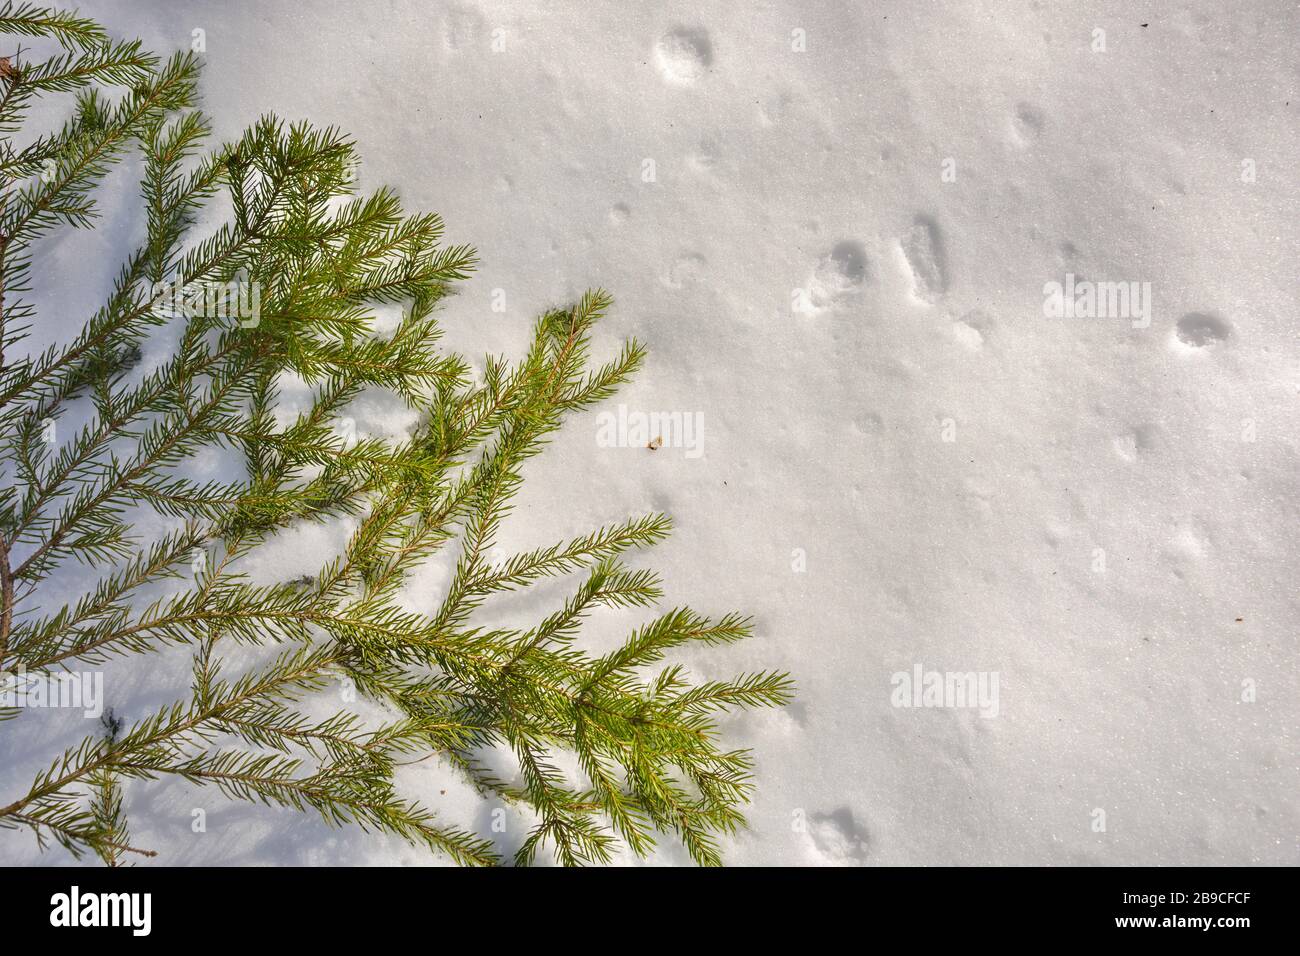 Green pine branch lying on a white spring snow. Stock Photo